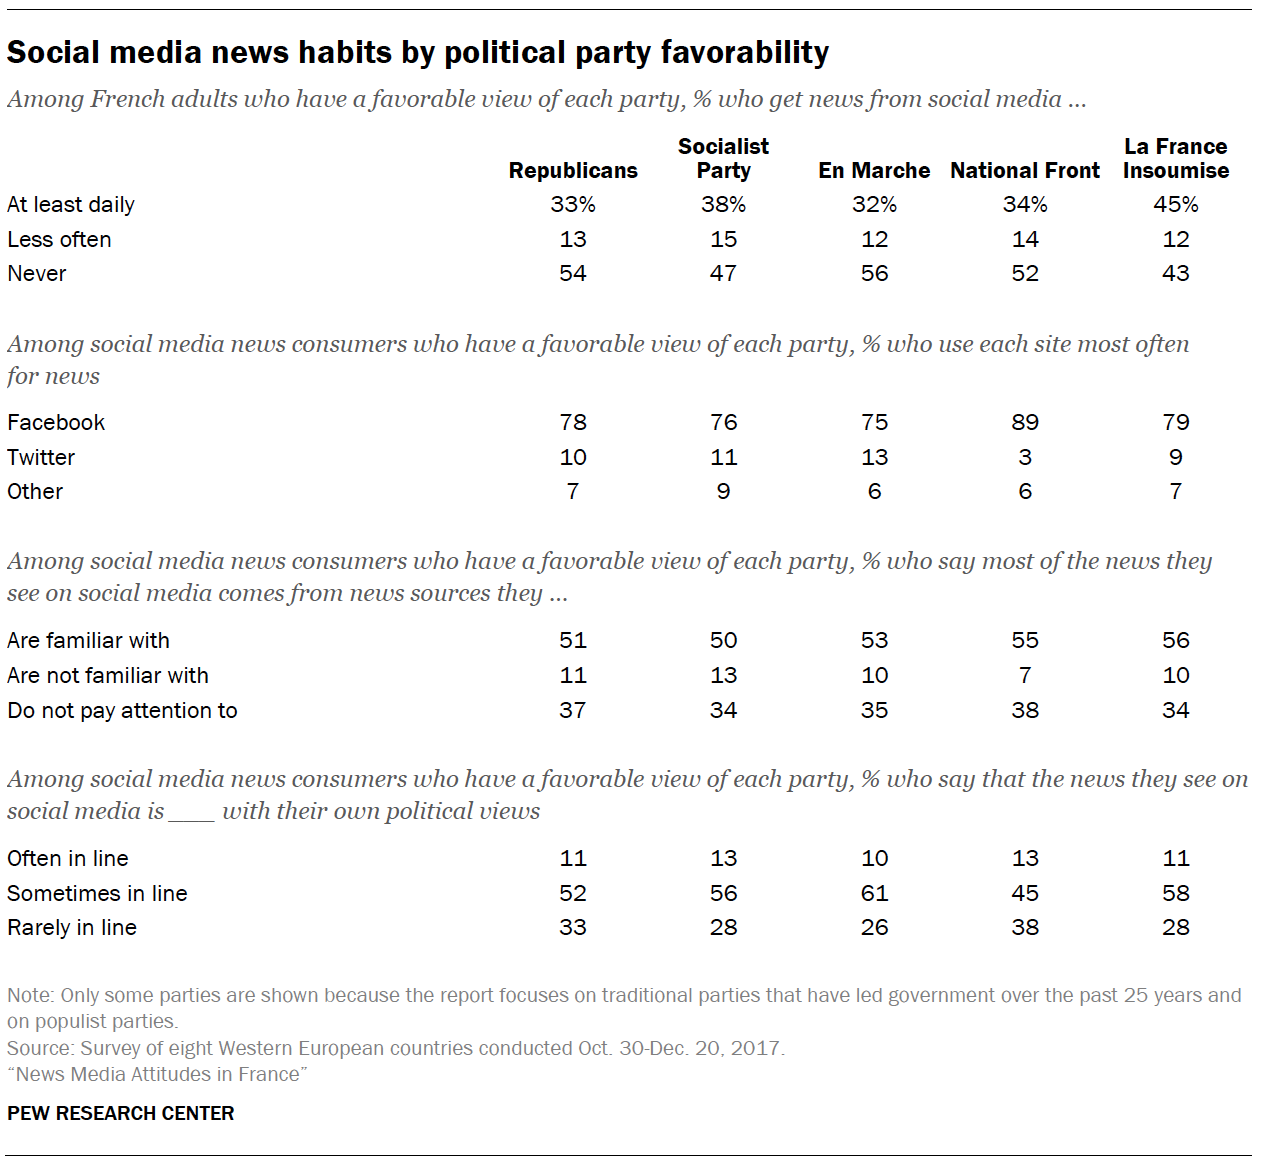 Social media news habits by political party favorability